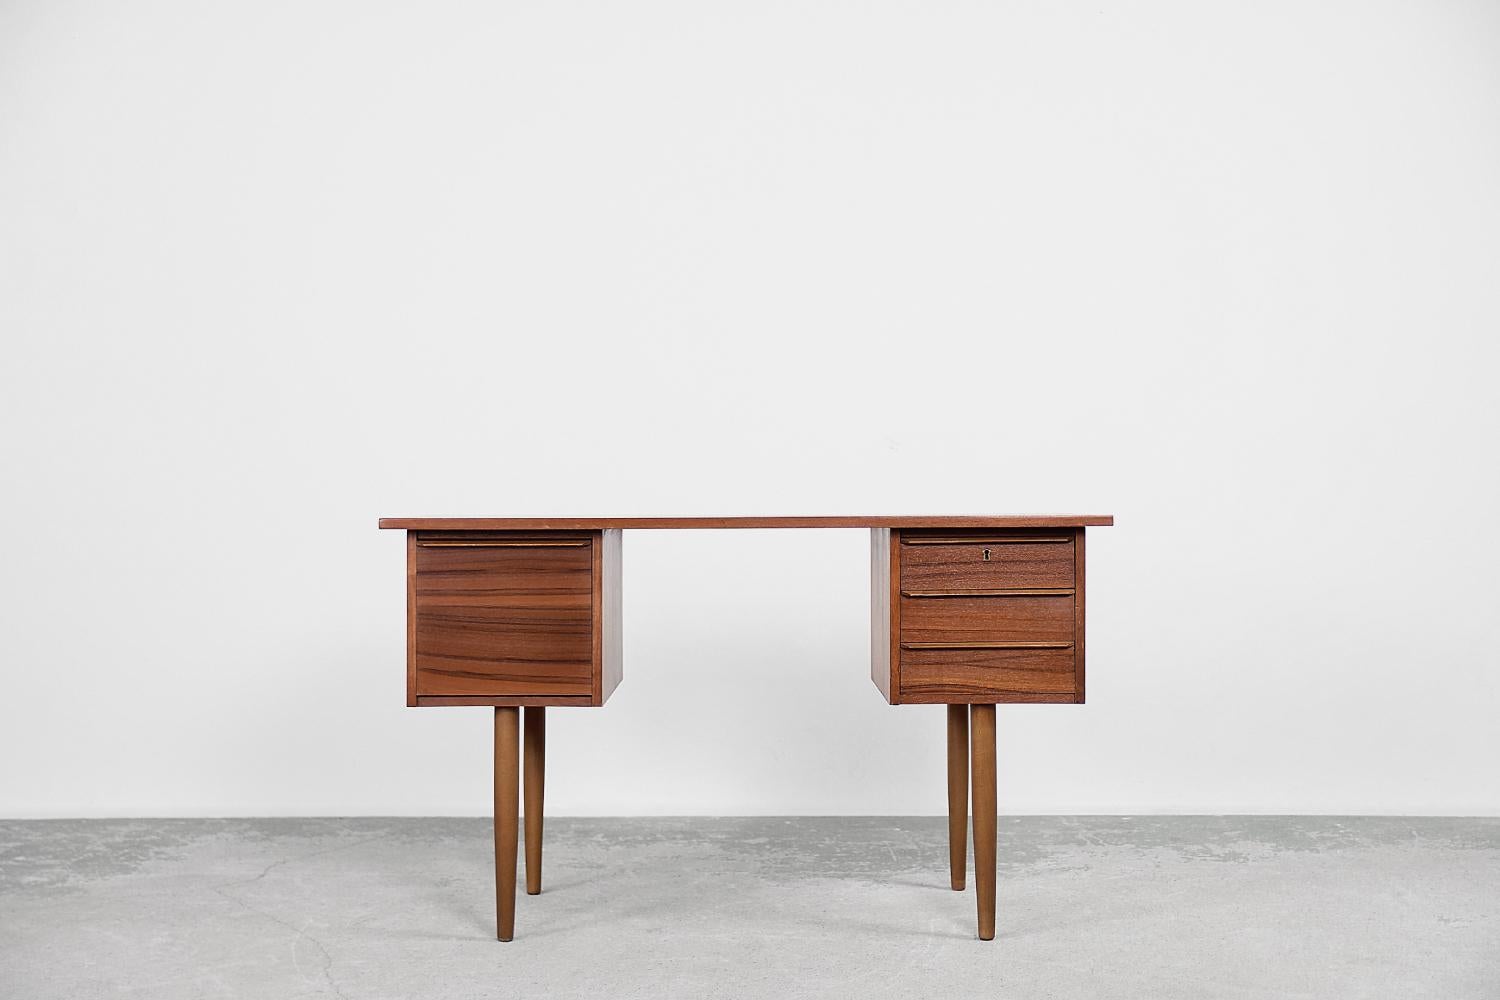 This classic desk was made in Sweden during the 1960s. It has been finished in teak wood in a warm shade of brown, with visible grain details. The desk has three smaller, flat drawers locked with a key on one side and one deep drawer on the other